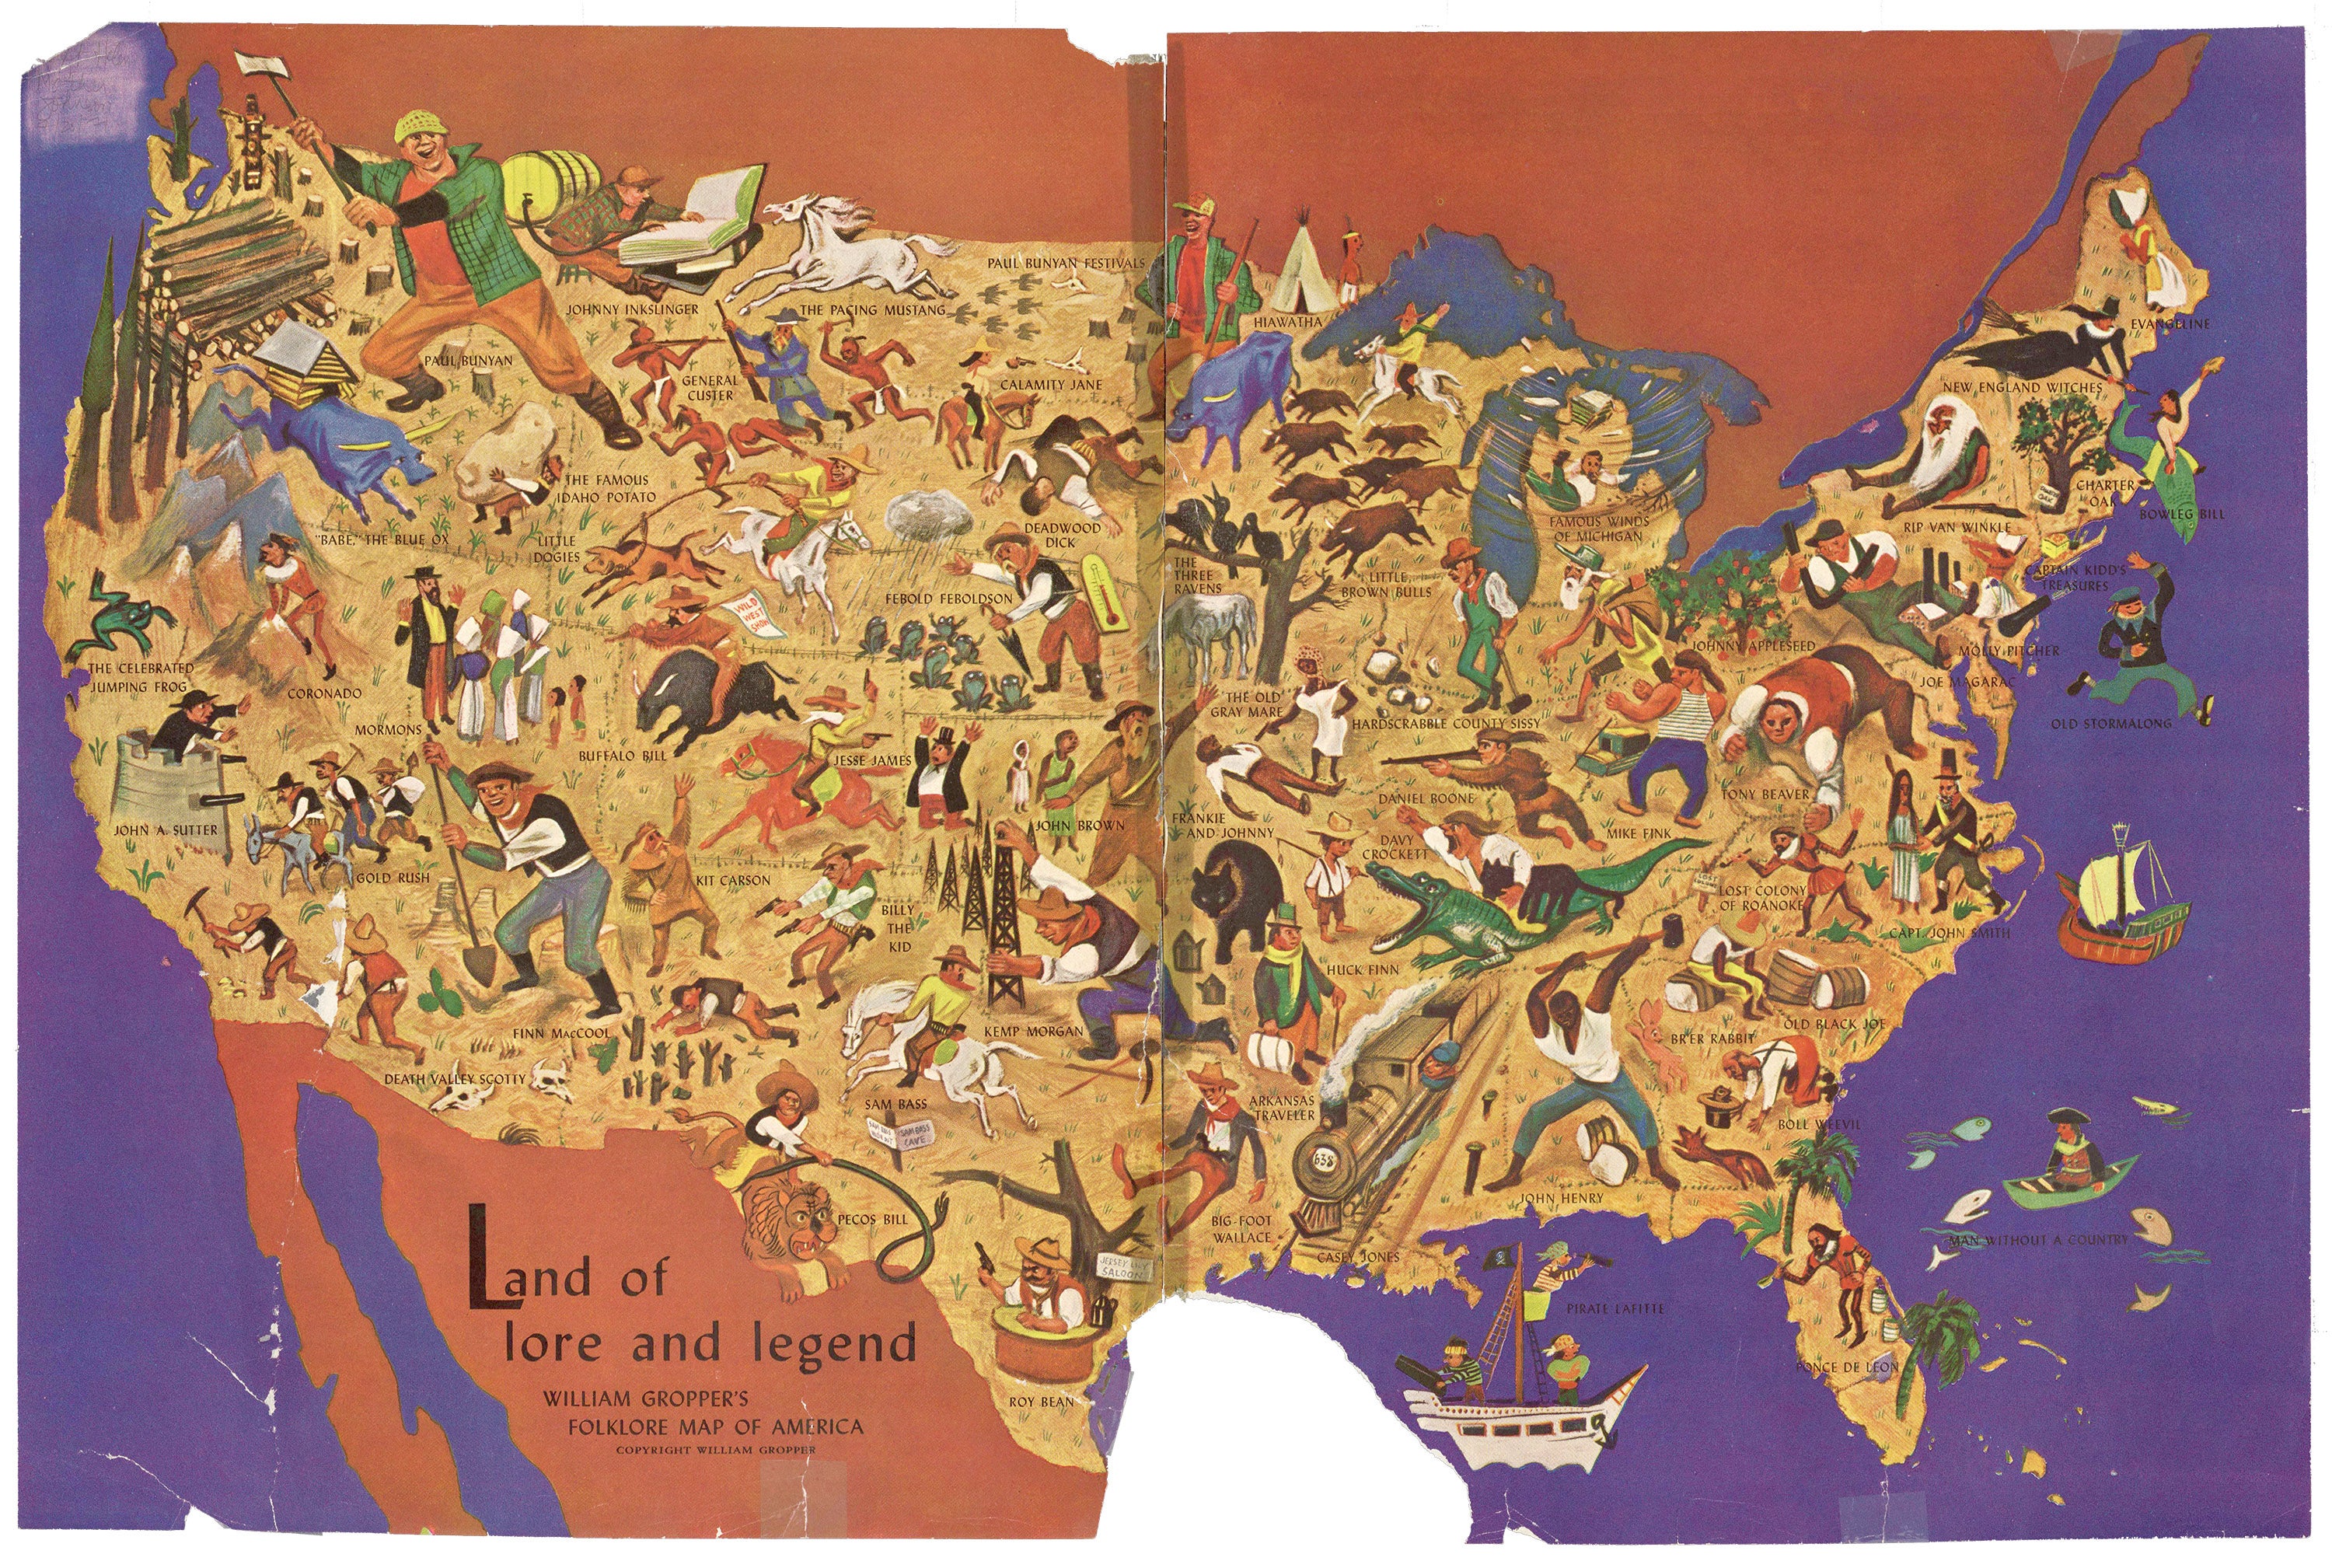 Pictorial Folklore Map of the United States